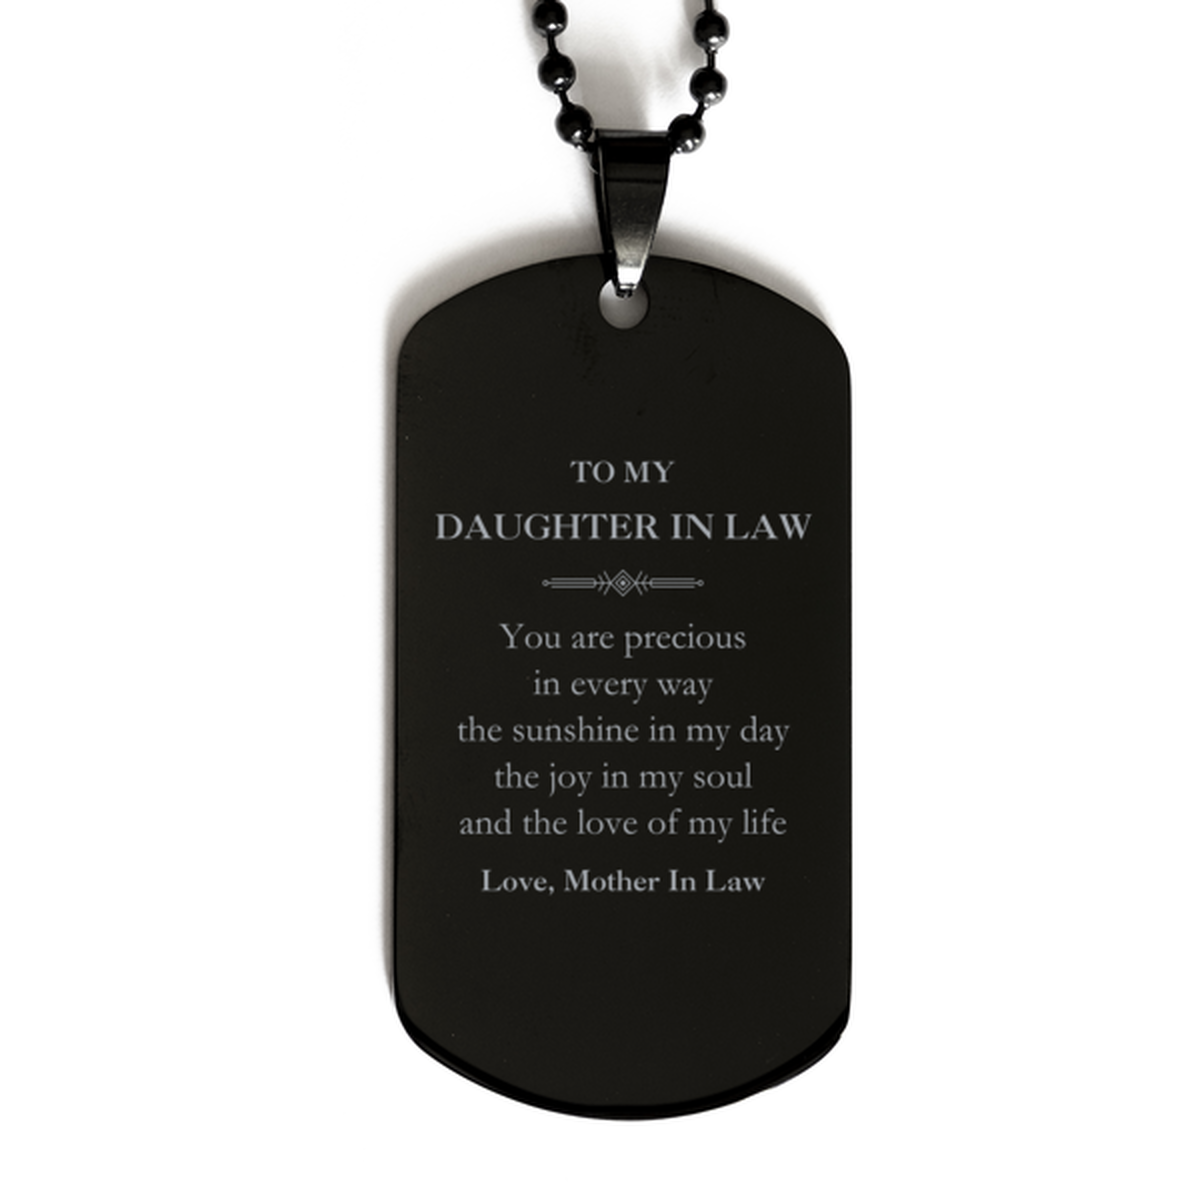 Graduation Gifts for Daughter In Law Black Dog Tag Present from Mother In Law, Christmas Daughter In Law Birthday Gifts Daughter In Law You are precious in every way the sunshine in my day. Love, Mother In Law